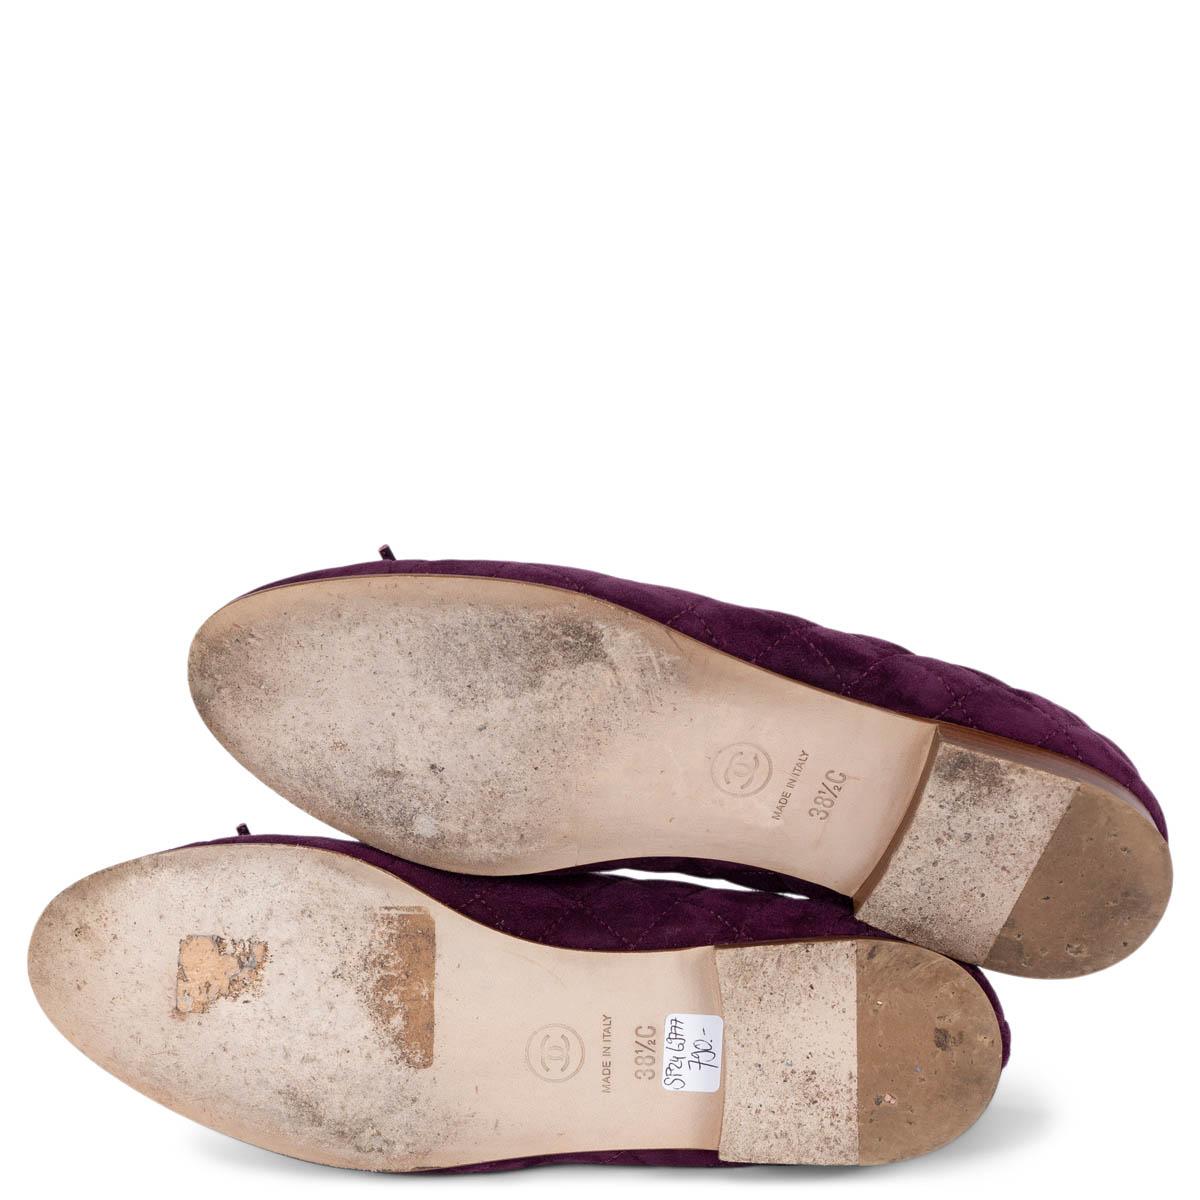 CHANEL purple suede QUILTED CLASSIC BALLET Flats Shoes 38.5 fit 38 For Sale 4